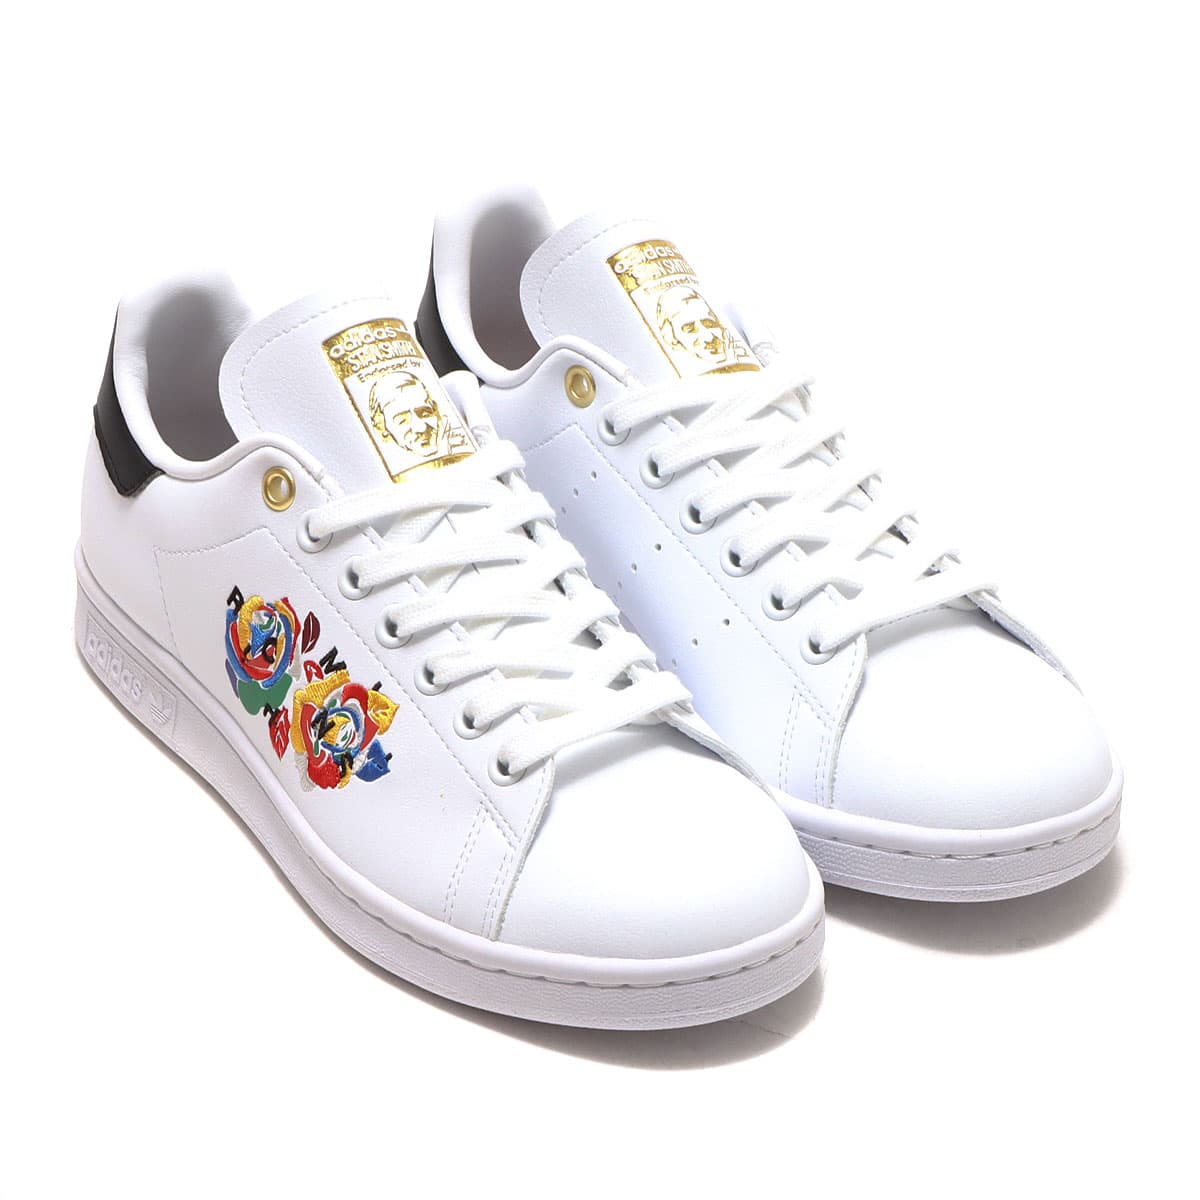 adidas RICH MNISI STAN SMITH FOOTWEAR WHITE/SUPPLIER COLOR/GOLD